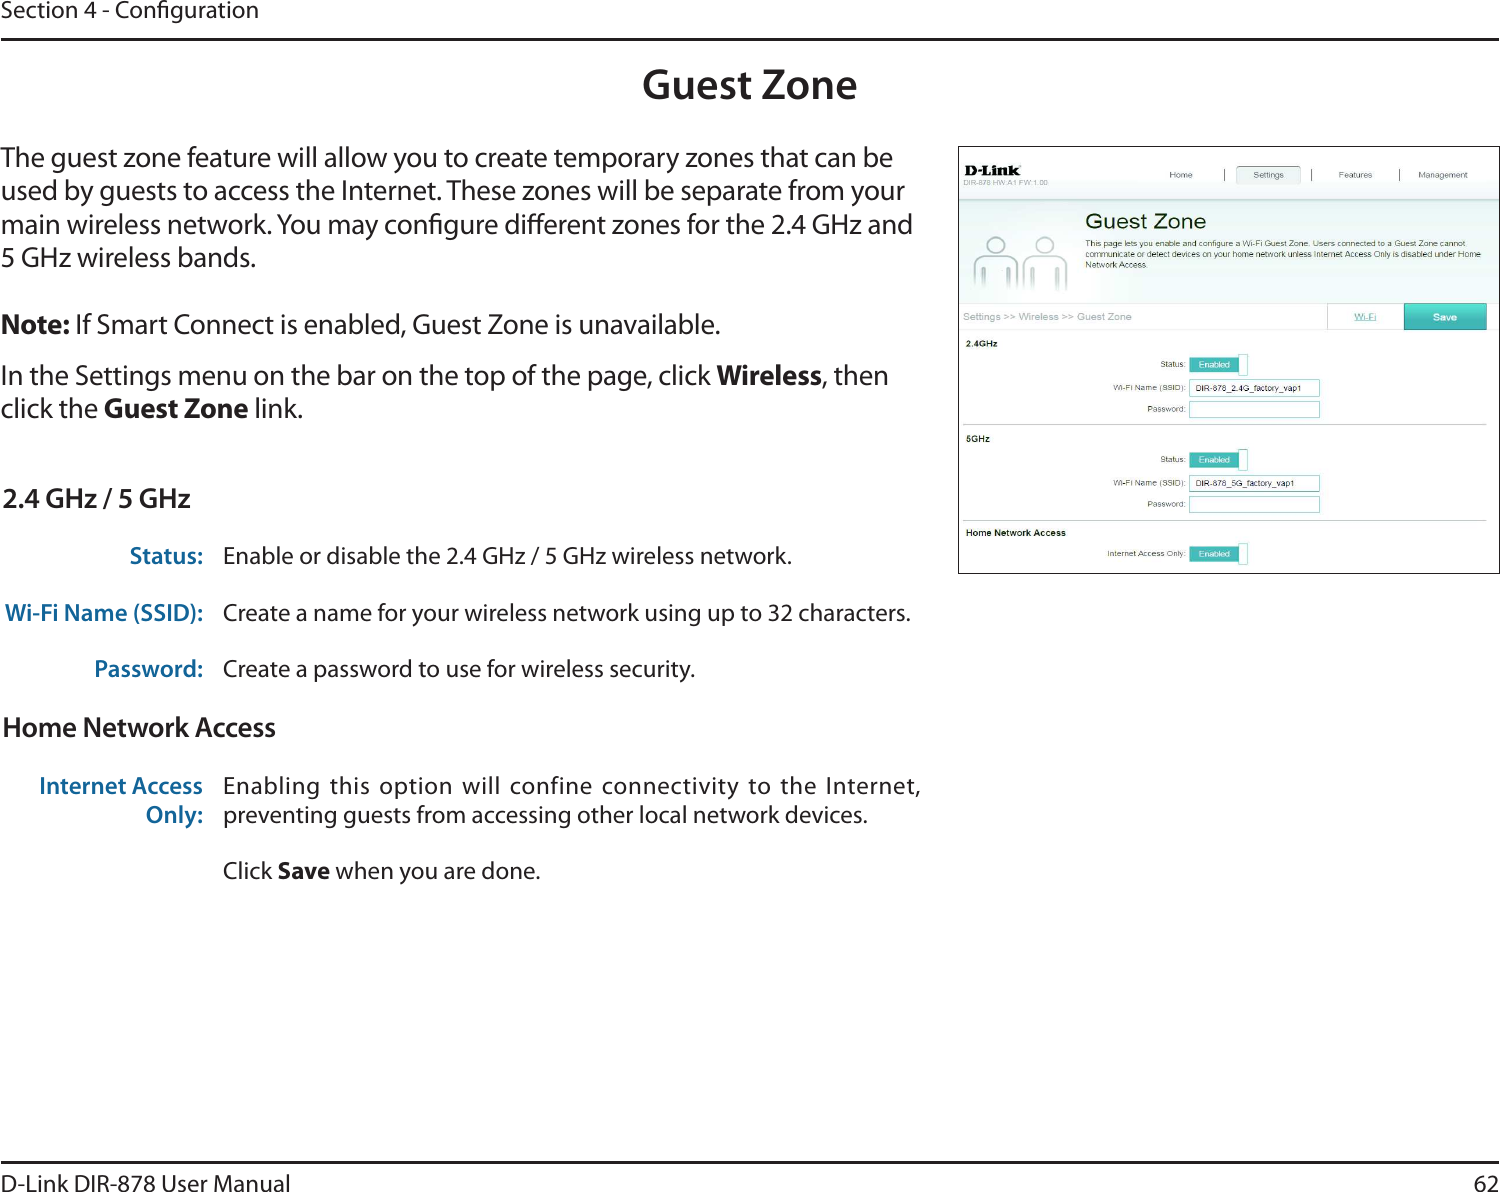 62D-Link DIR-878 User ManualSection 4 - CongurationGuest ZoneIn the Settings menu on the bar on the top of the page, click Wireless, then click the Guest Zone link. The guest zone feature will allow you to create temporary zones that can be used by guests to access the Internet. These zones will be separate from your main wireless network. You may congure dierent zones for the 2.4 GHz and 5 GHz wireless bands.Note: If Smart Connect is enabled, Guest Zone is unavailable.2.4 GHz / 5 GHzStatus: Enable or disable the 2.4 GHz / 5 GHz wireless network.Wi-Fi Name (SSID): Create a name for your wireless network using up to 32 characters. Password: Create a password to use for wireless security. Home Network AccessInternet Access Only:Enabling  this  option  will  confine  connectivity  to  the  Internet, preventing guests from accessing other local network devices.Click Save when you are done.